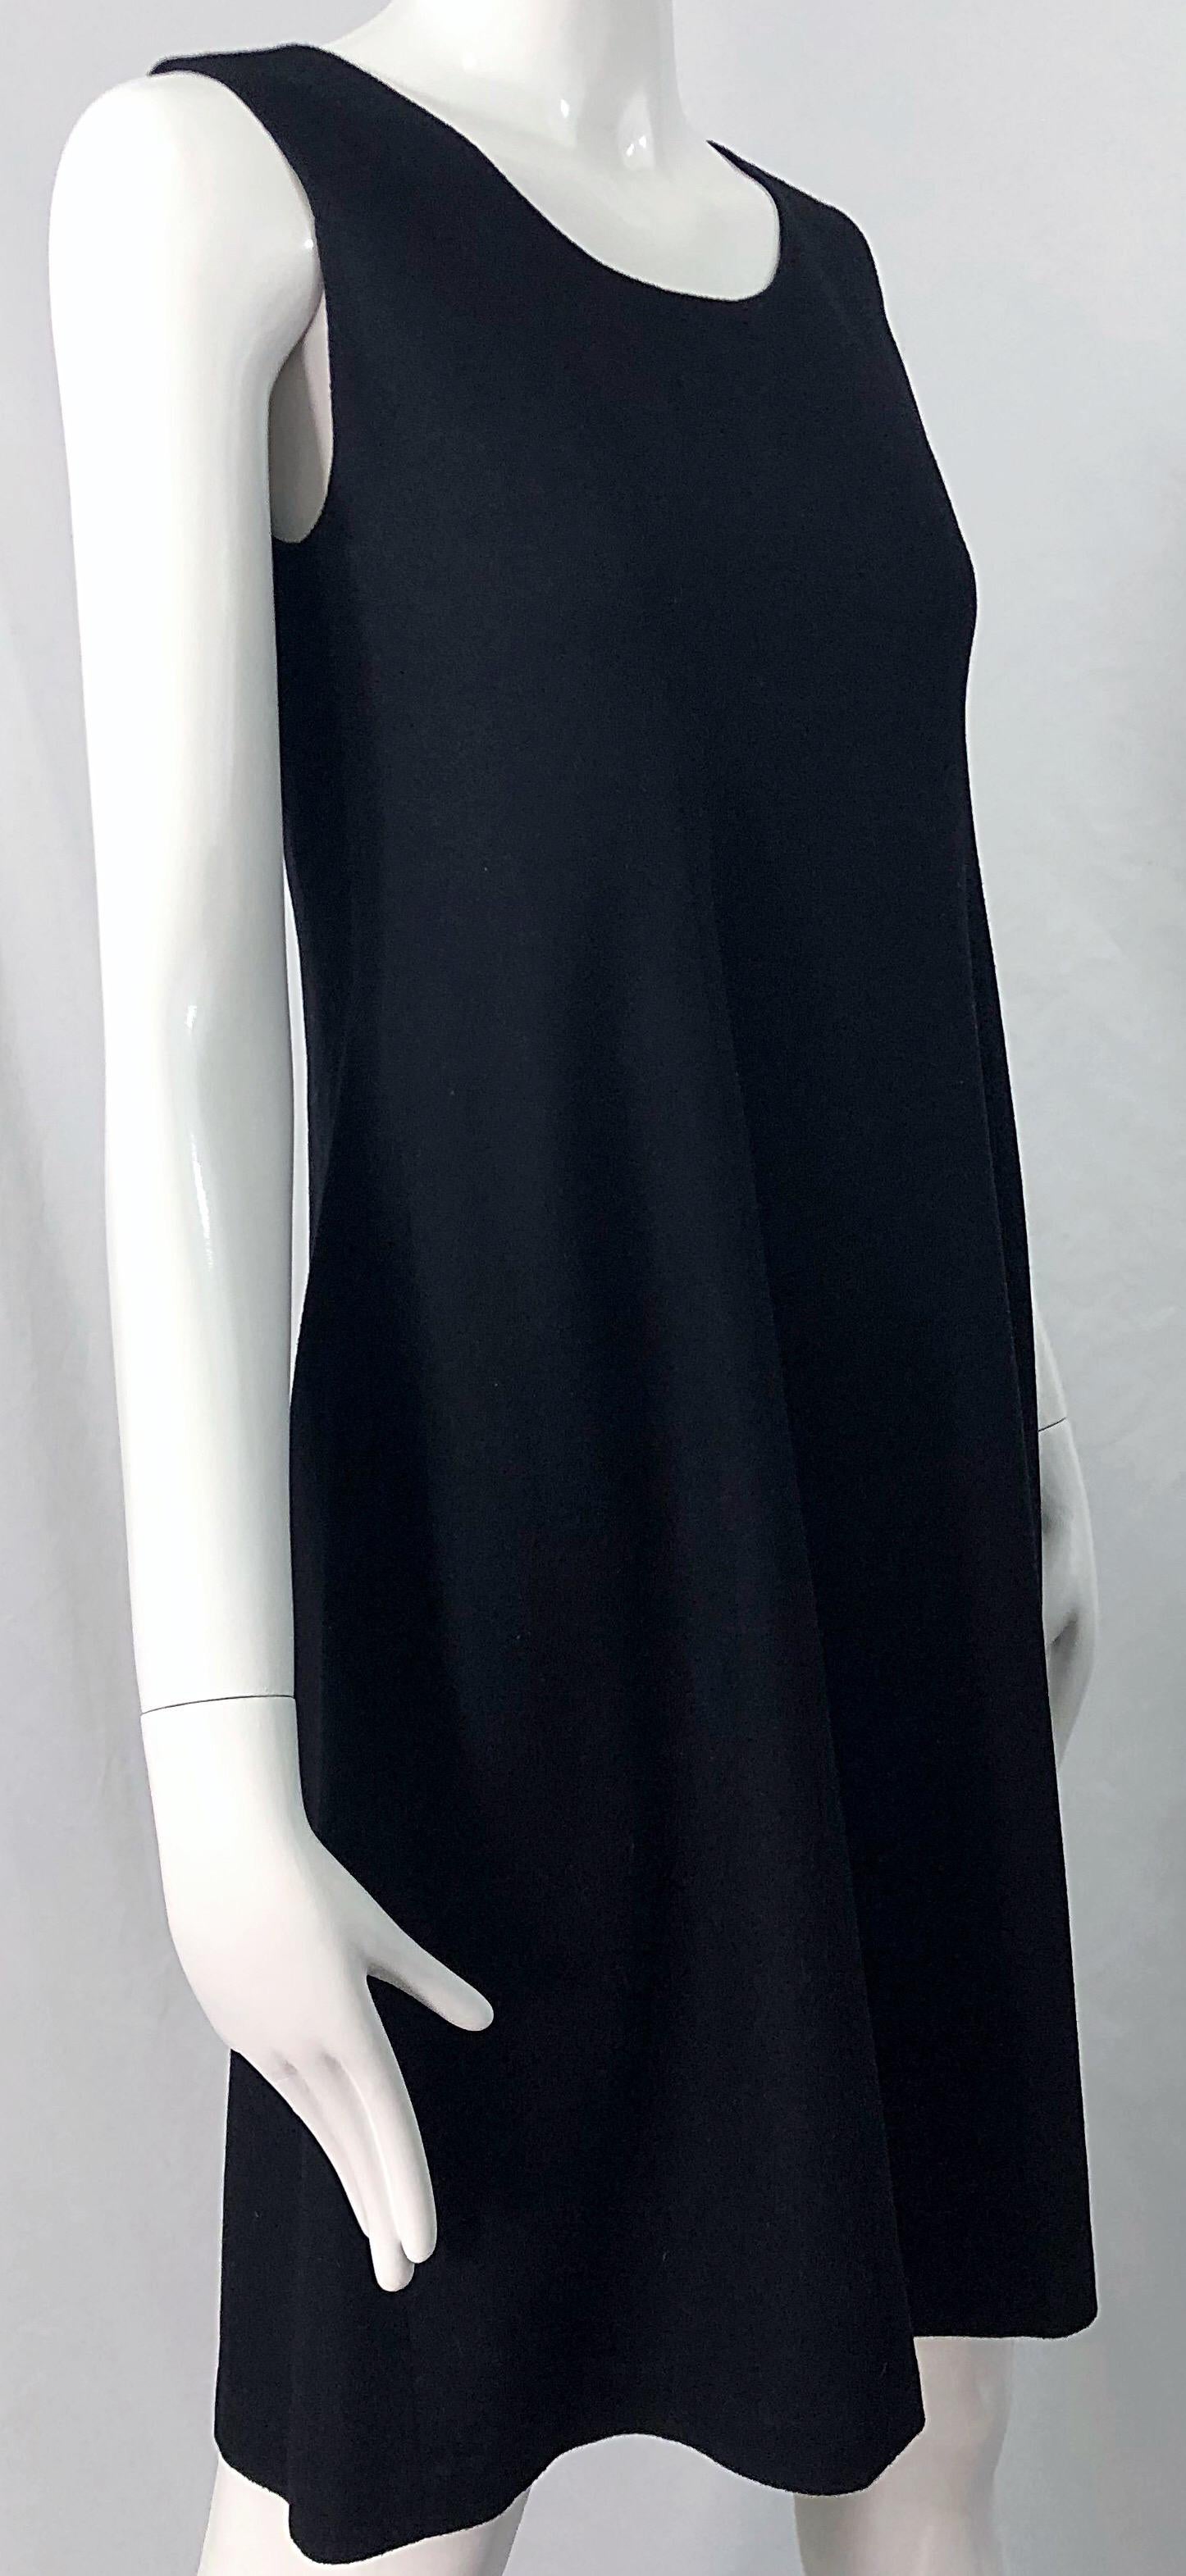 1990s Morgan Le Fay by Liliana Casbal Black Wool Minimalist Vintage 90s Dress In Excellent Condition For Sale In San Diego, CA